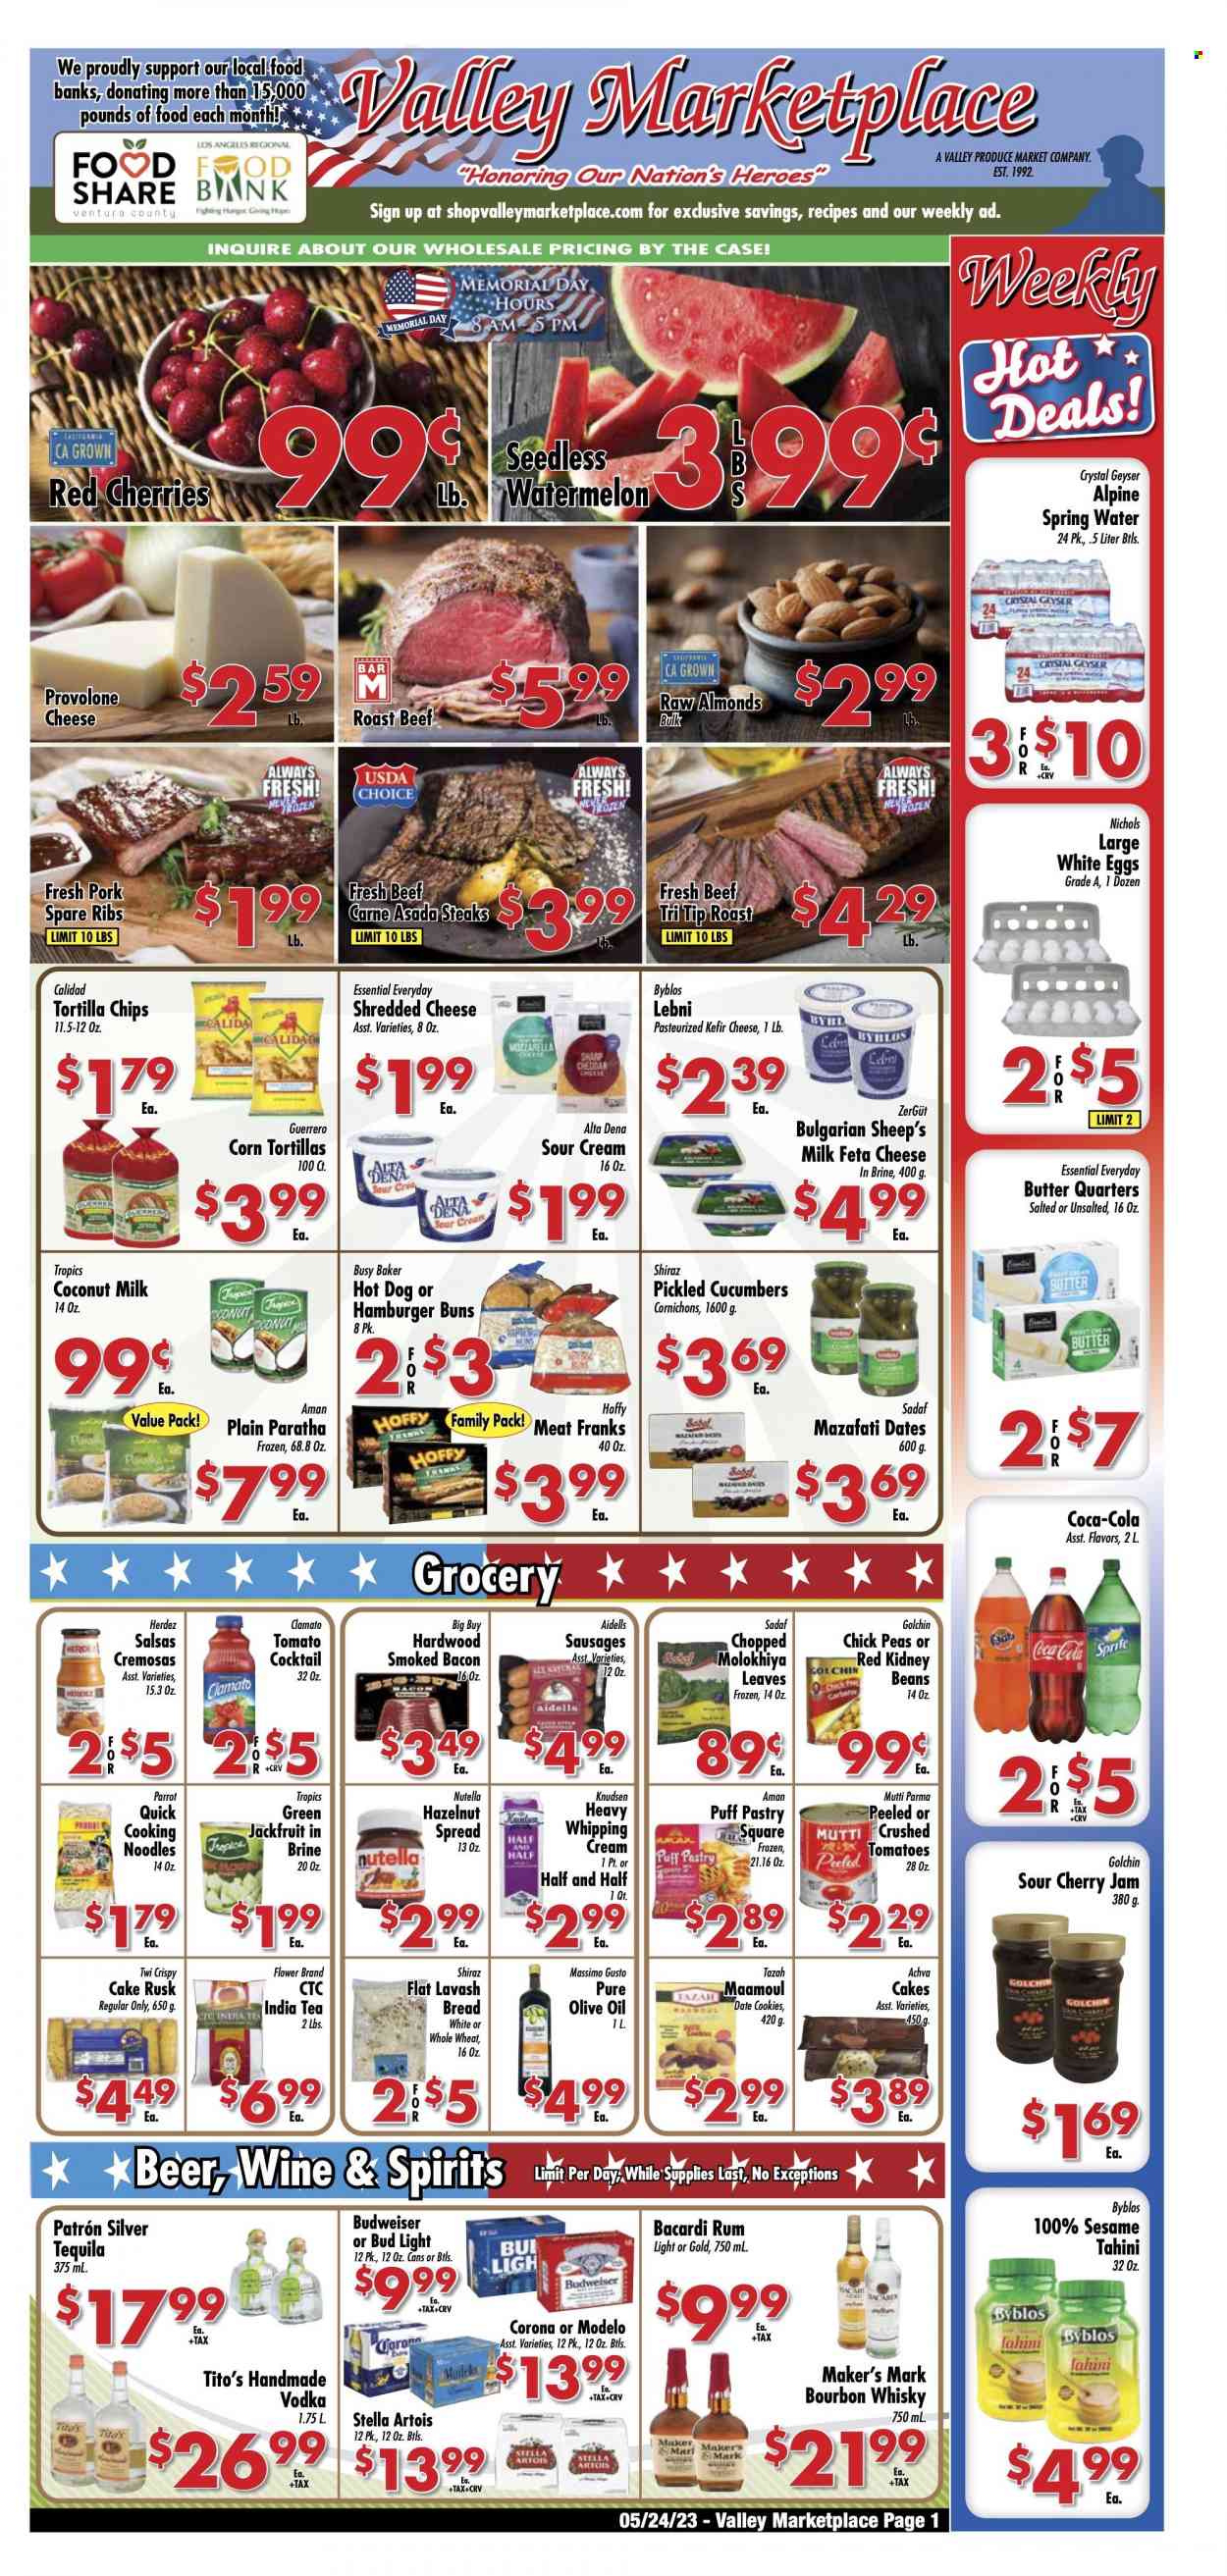 thumbnail - Valley Marketplace Flyer - 05/24/2023 - 05/30/2023 - Sales products - bread, corn tortillas, cake, buns, burger buns, rusks, beans, peas, watermelon, cherries, hot dog, noodles, roast, bacon, sausage, frankfurters, mozzarella, shredded cheese, cheese, feta, Provolone, kefir, eggs, butter, sour cream, whipping cream, puff pastry, cookies, Nutella, ma'amoul, tortilla chips, coconut milk, kidney beans, pickled gherkins, cornichons, tahini, olive oil, oil, fruit jam, cherry jam, hazelnut spread, almonds, Coca-Cola, Sprite, Clamato, soft drink, spring water, water, tea, red wine, wine, alcohol, Shiraz, Bacardi, bourbon, rum, tequila, vodka, whisky, cocktail, beer, Stella Artois, Bud Light, Corona Extra, Modelo, beef meat, steak, roast beef, ribs, pork meat, pork ribs, pork spare ribs, Budweiser, Half and half. Page 1.